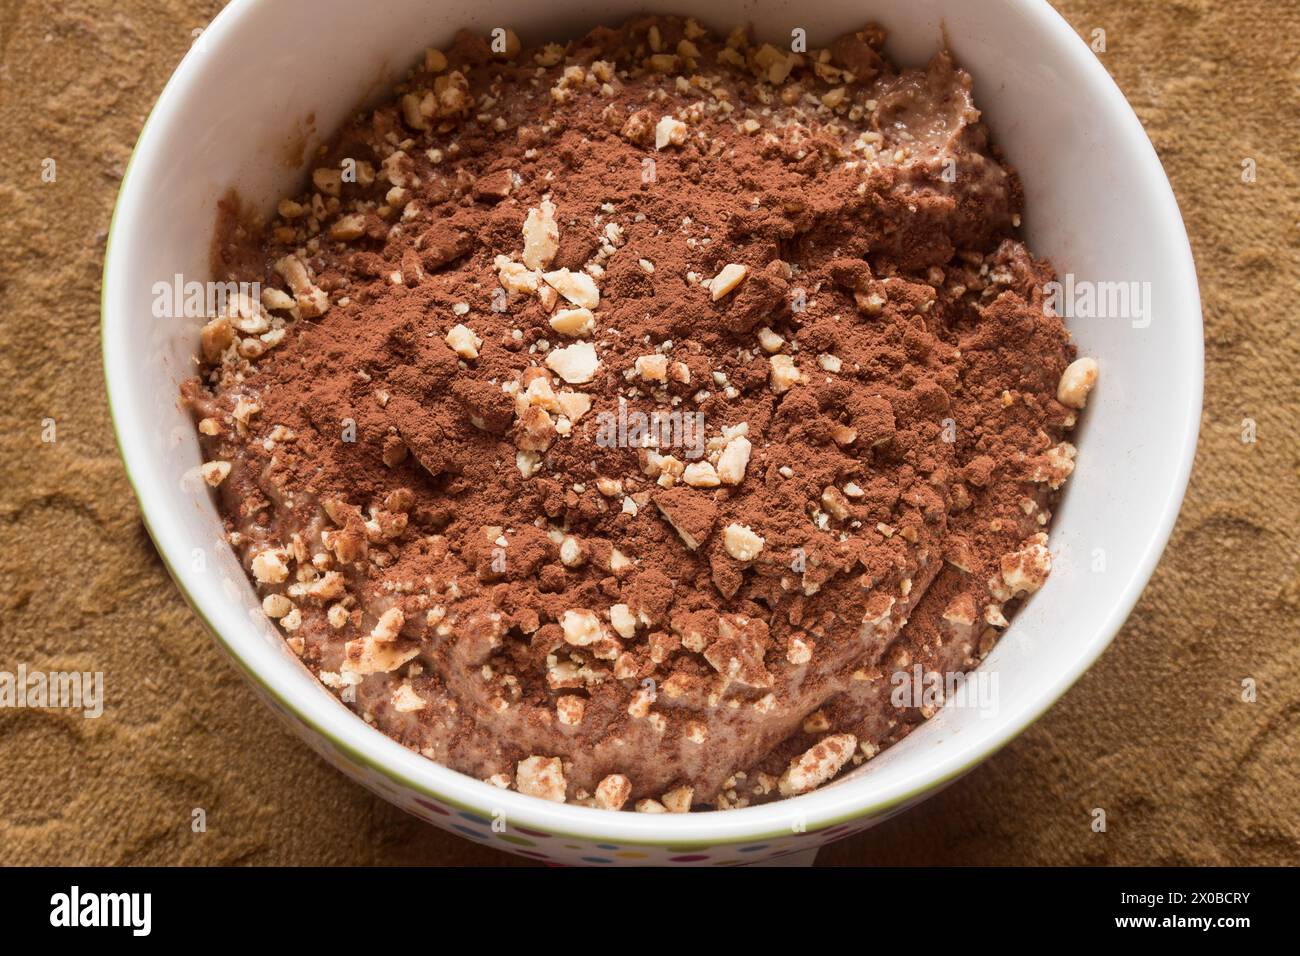 Overhead view of a bowl of creamy, homemade chocolate dessert, sprinkled with crushed almonds and nuts, and dusted with cocoa powder on a velvet chair Stock Photo